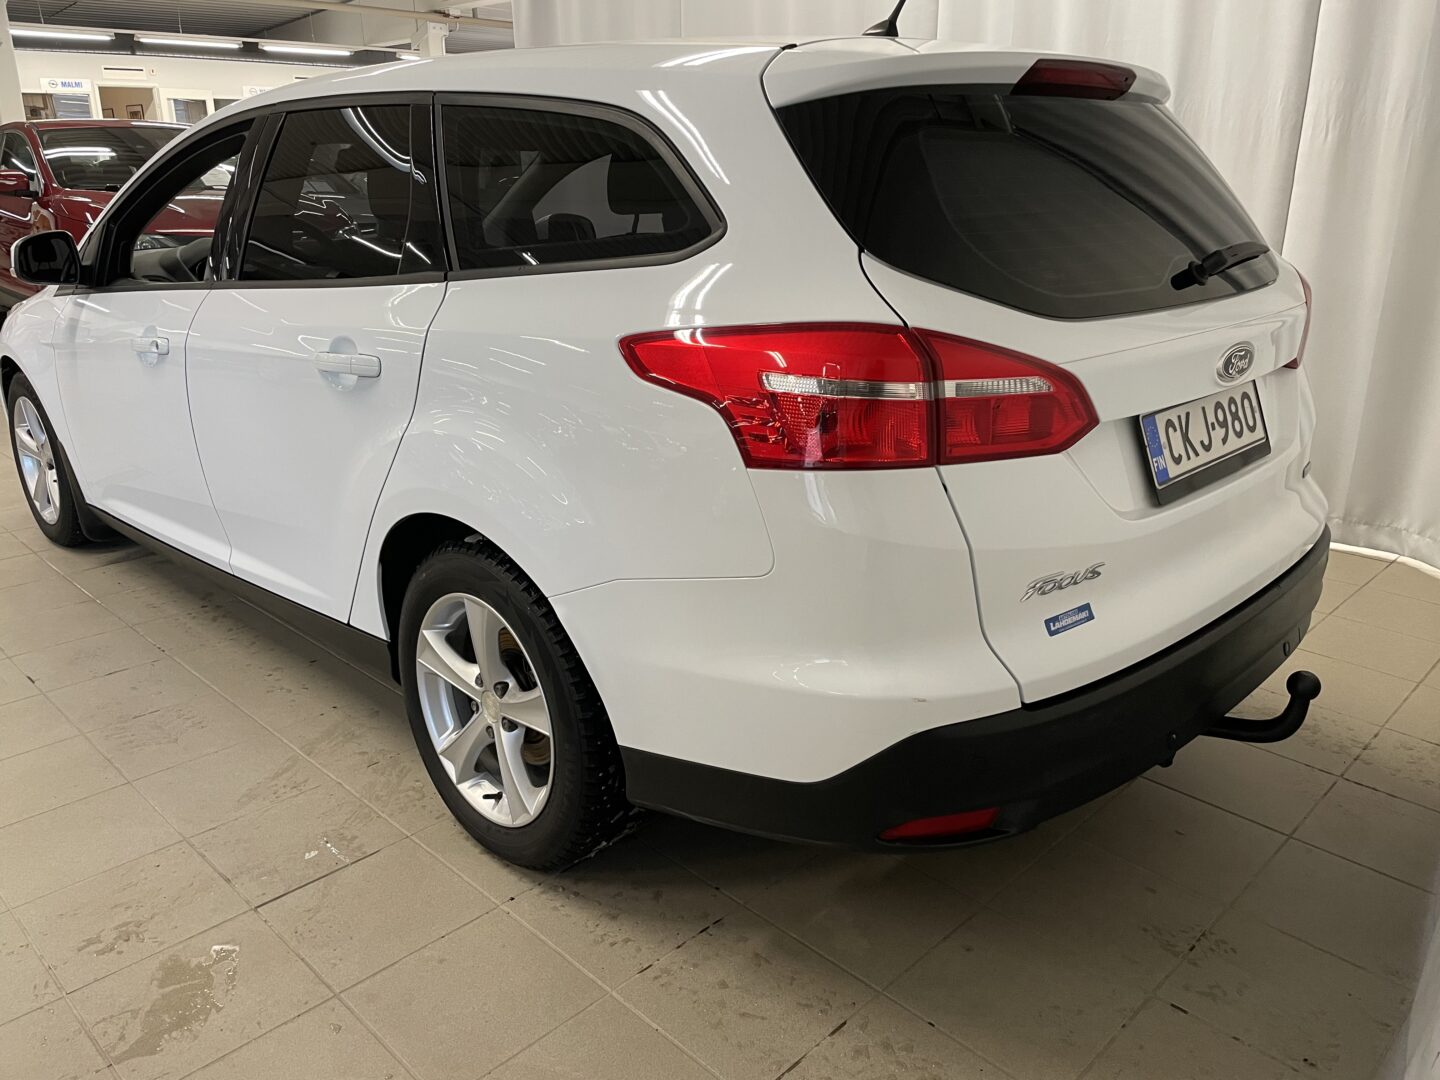 FORD FOCUS 1,0 EcoBoost 125 hv Start/Stop A6 Wagon Trend